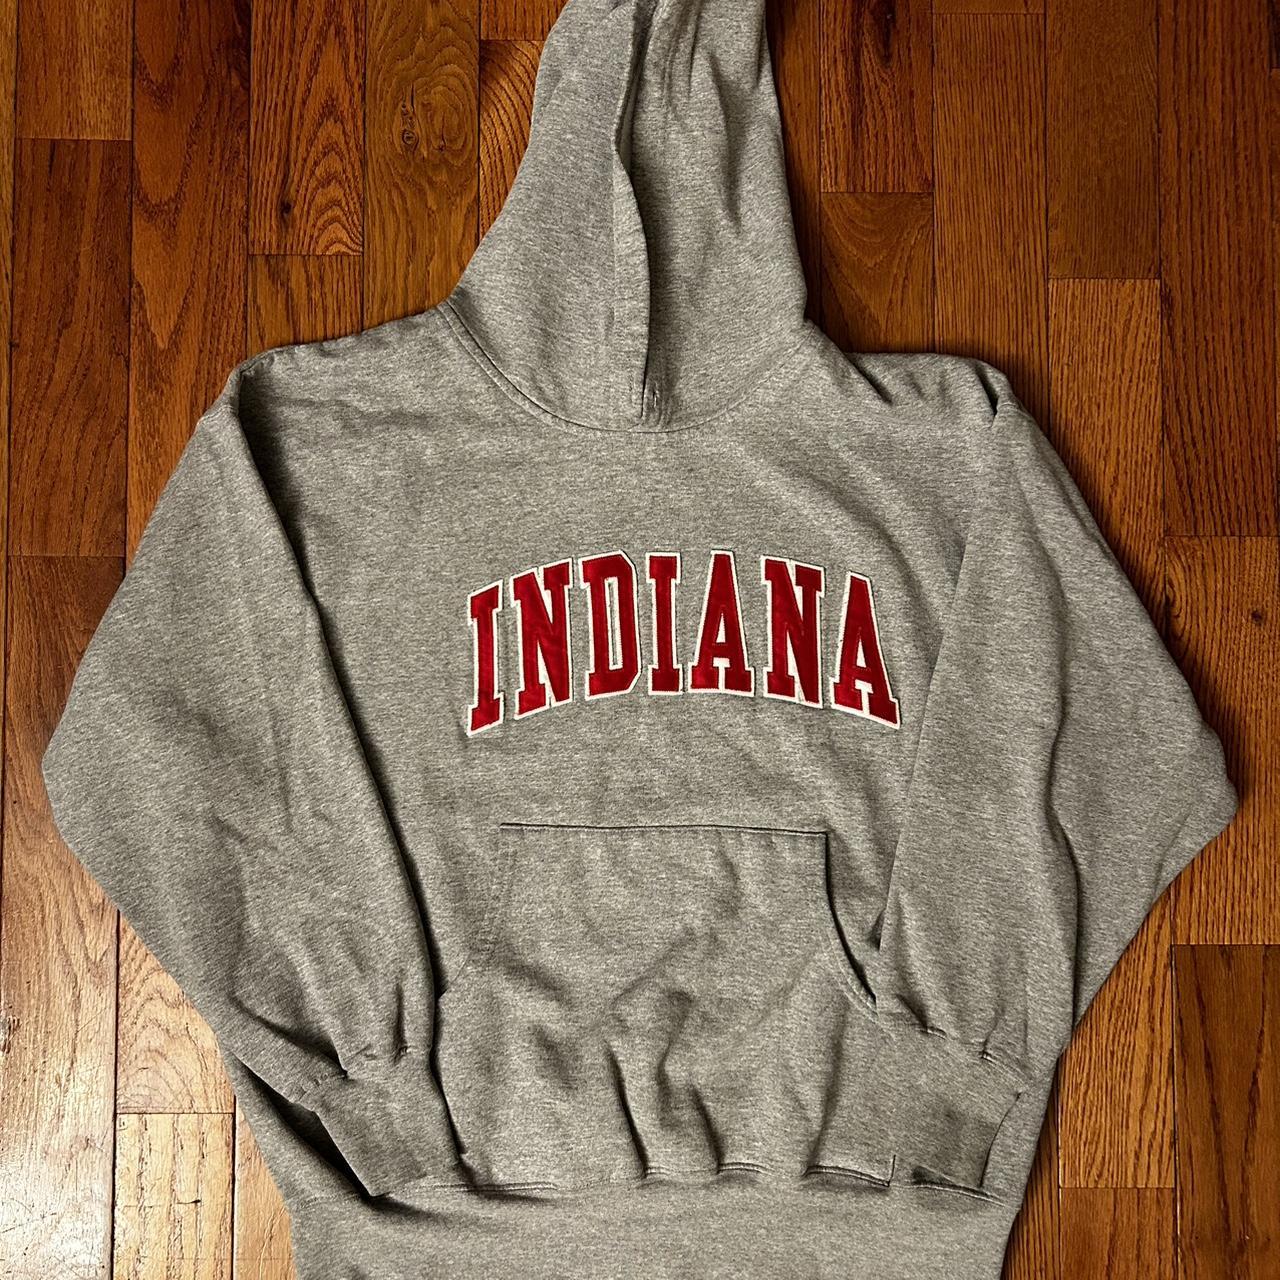 Indiana Majestic Vintage Sewn Hoodie Size